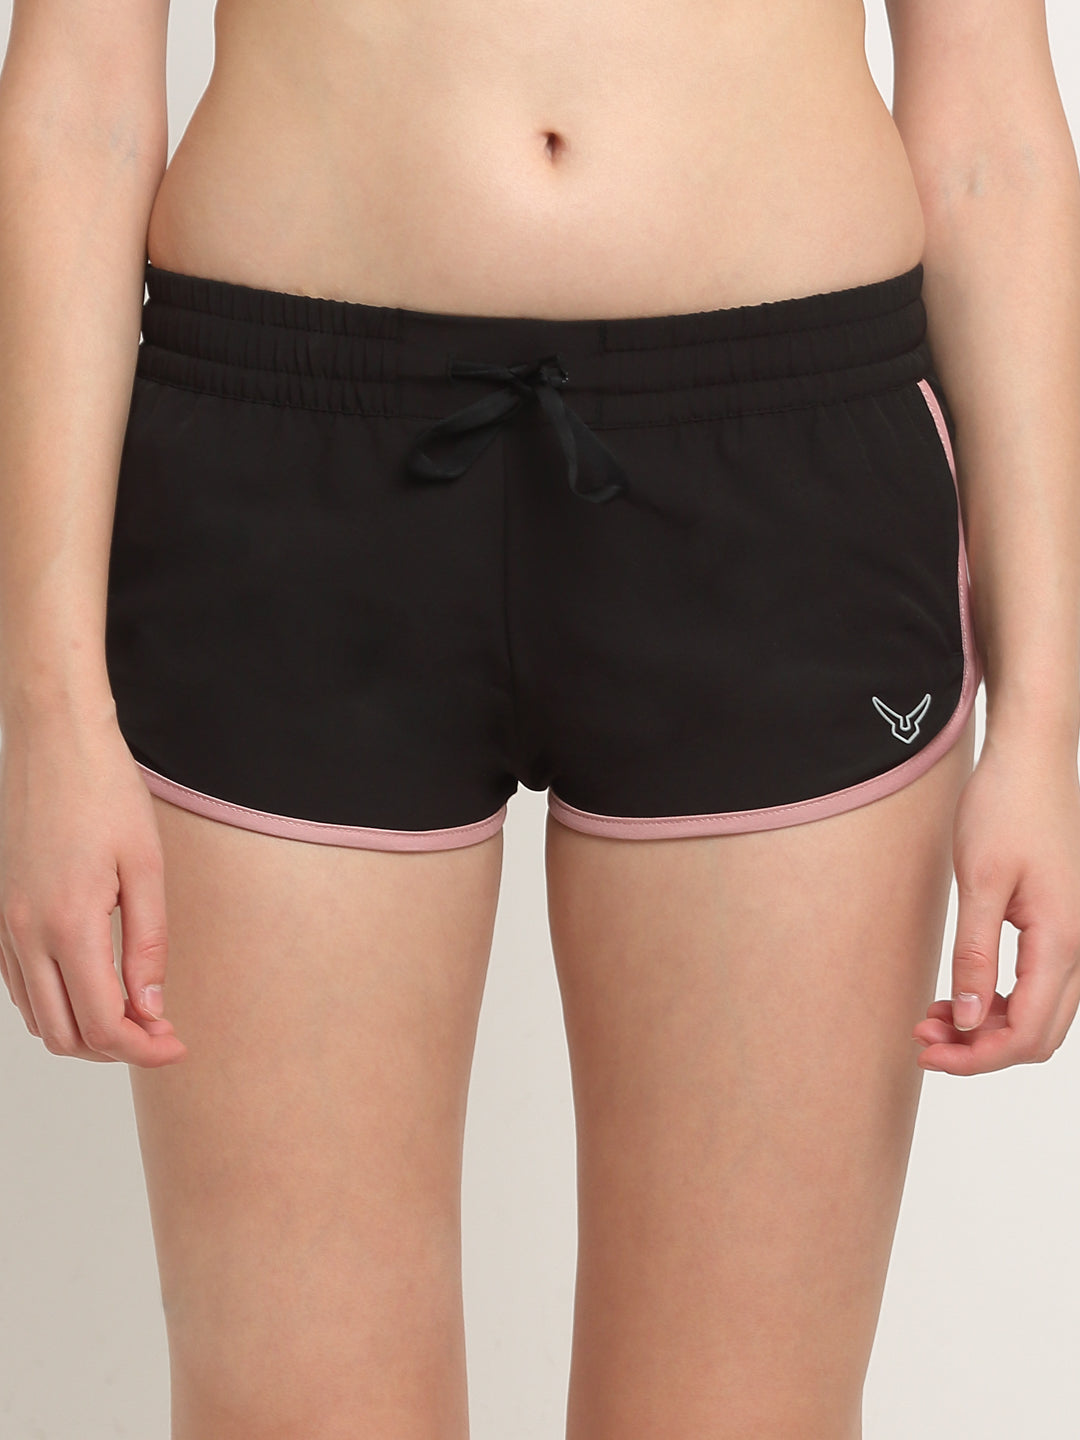 Invincible Women's Feather Weight Stretch Running Short